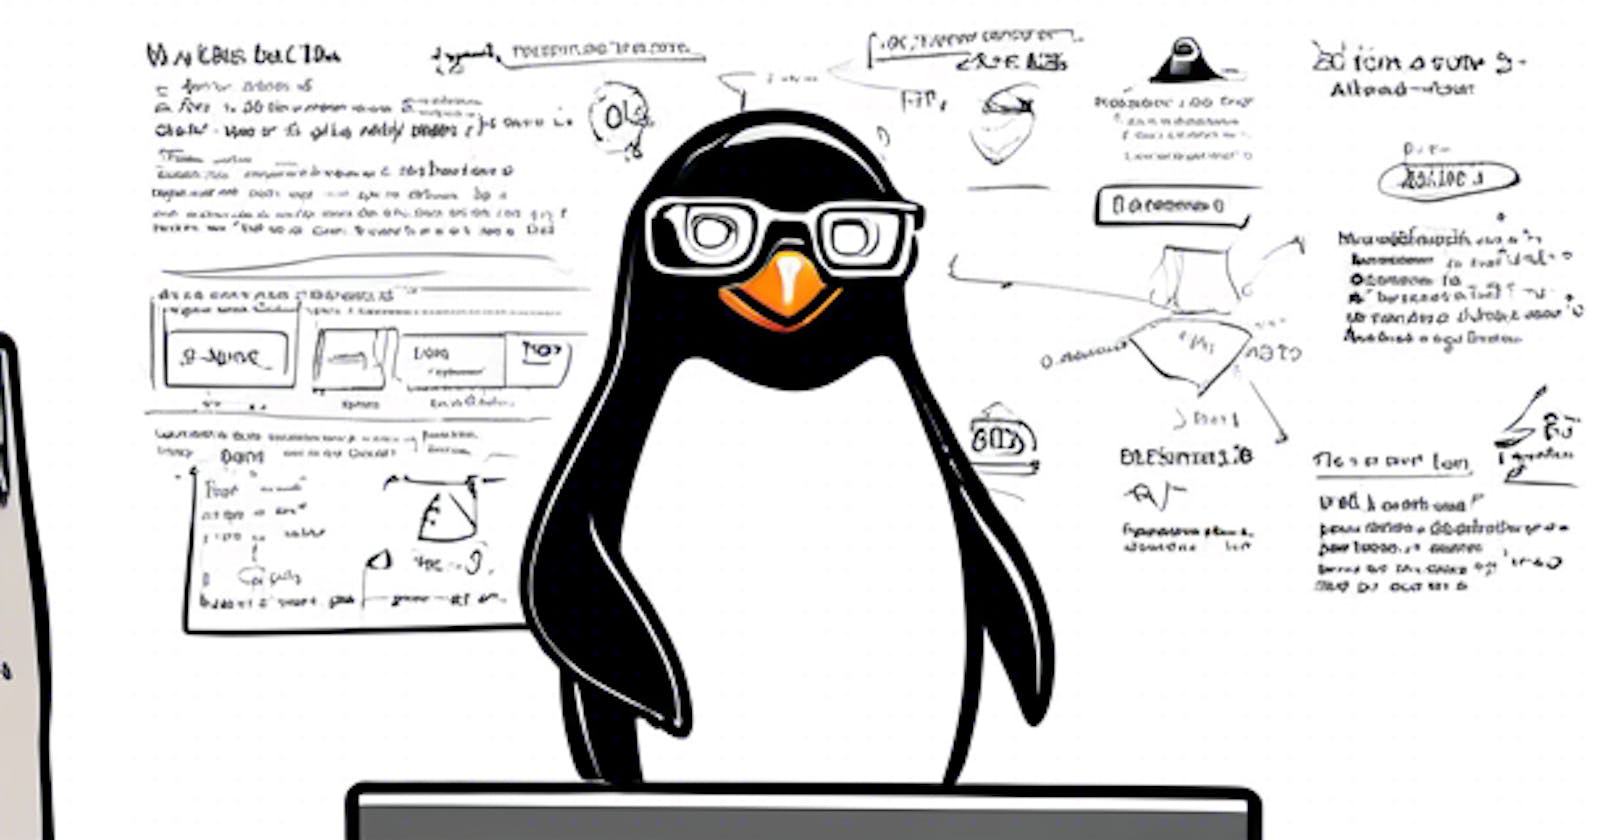 Linux Under the Hood: A High-Level Architectural View